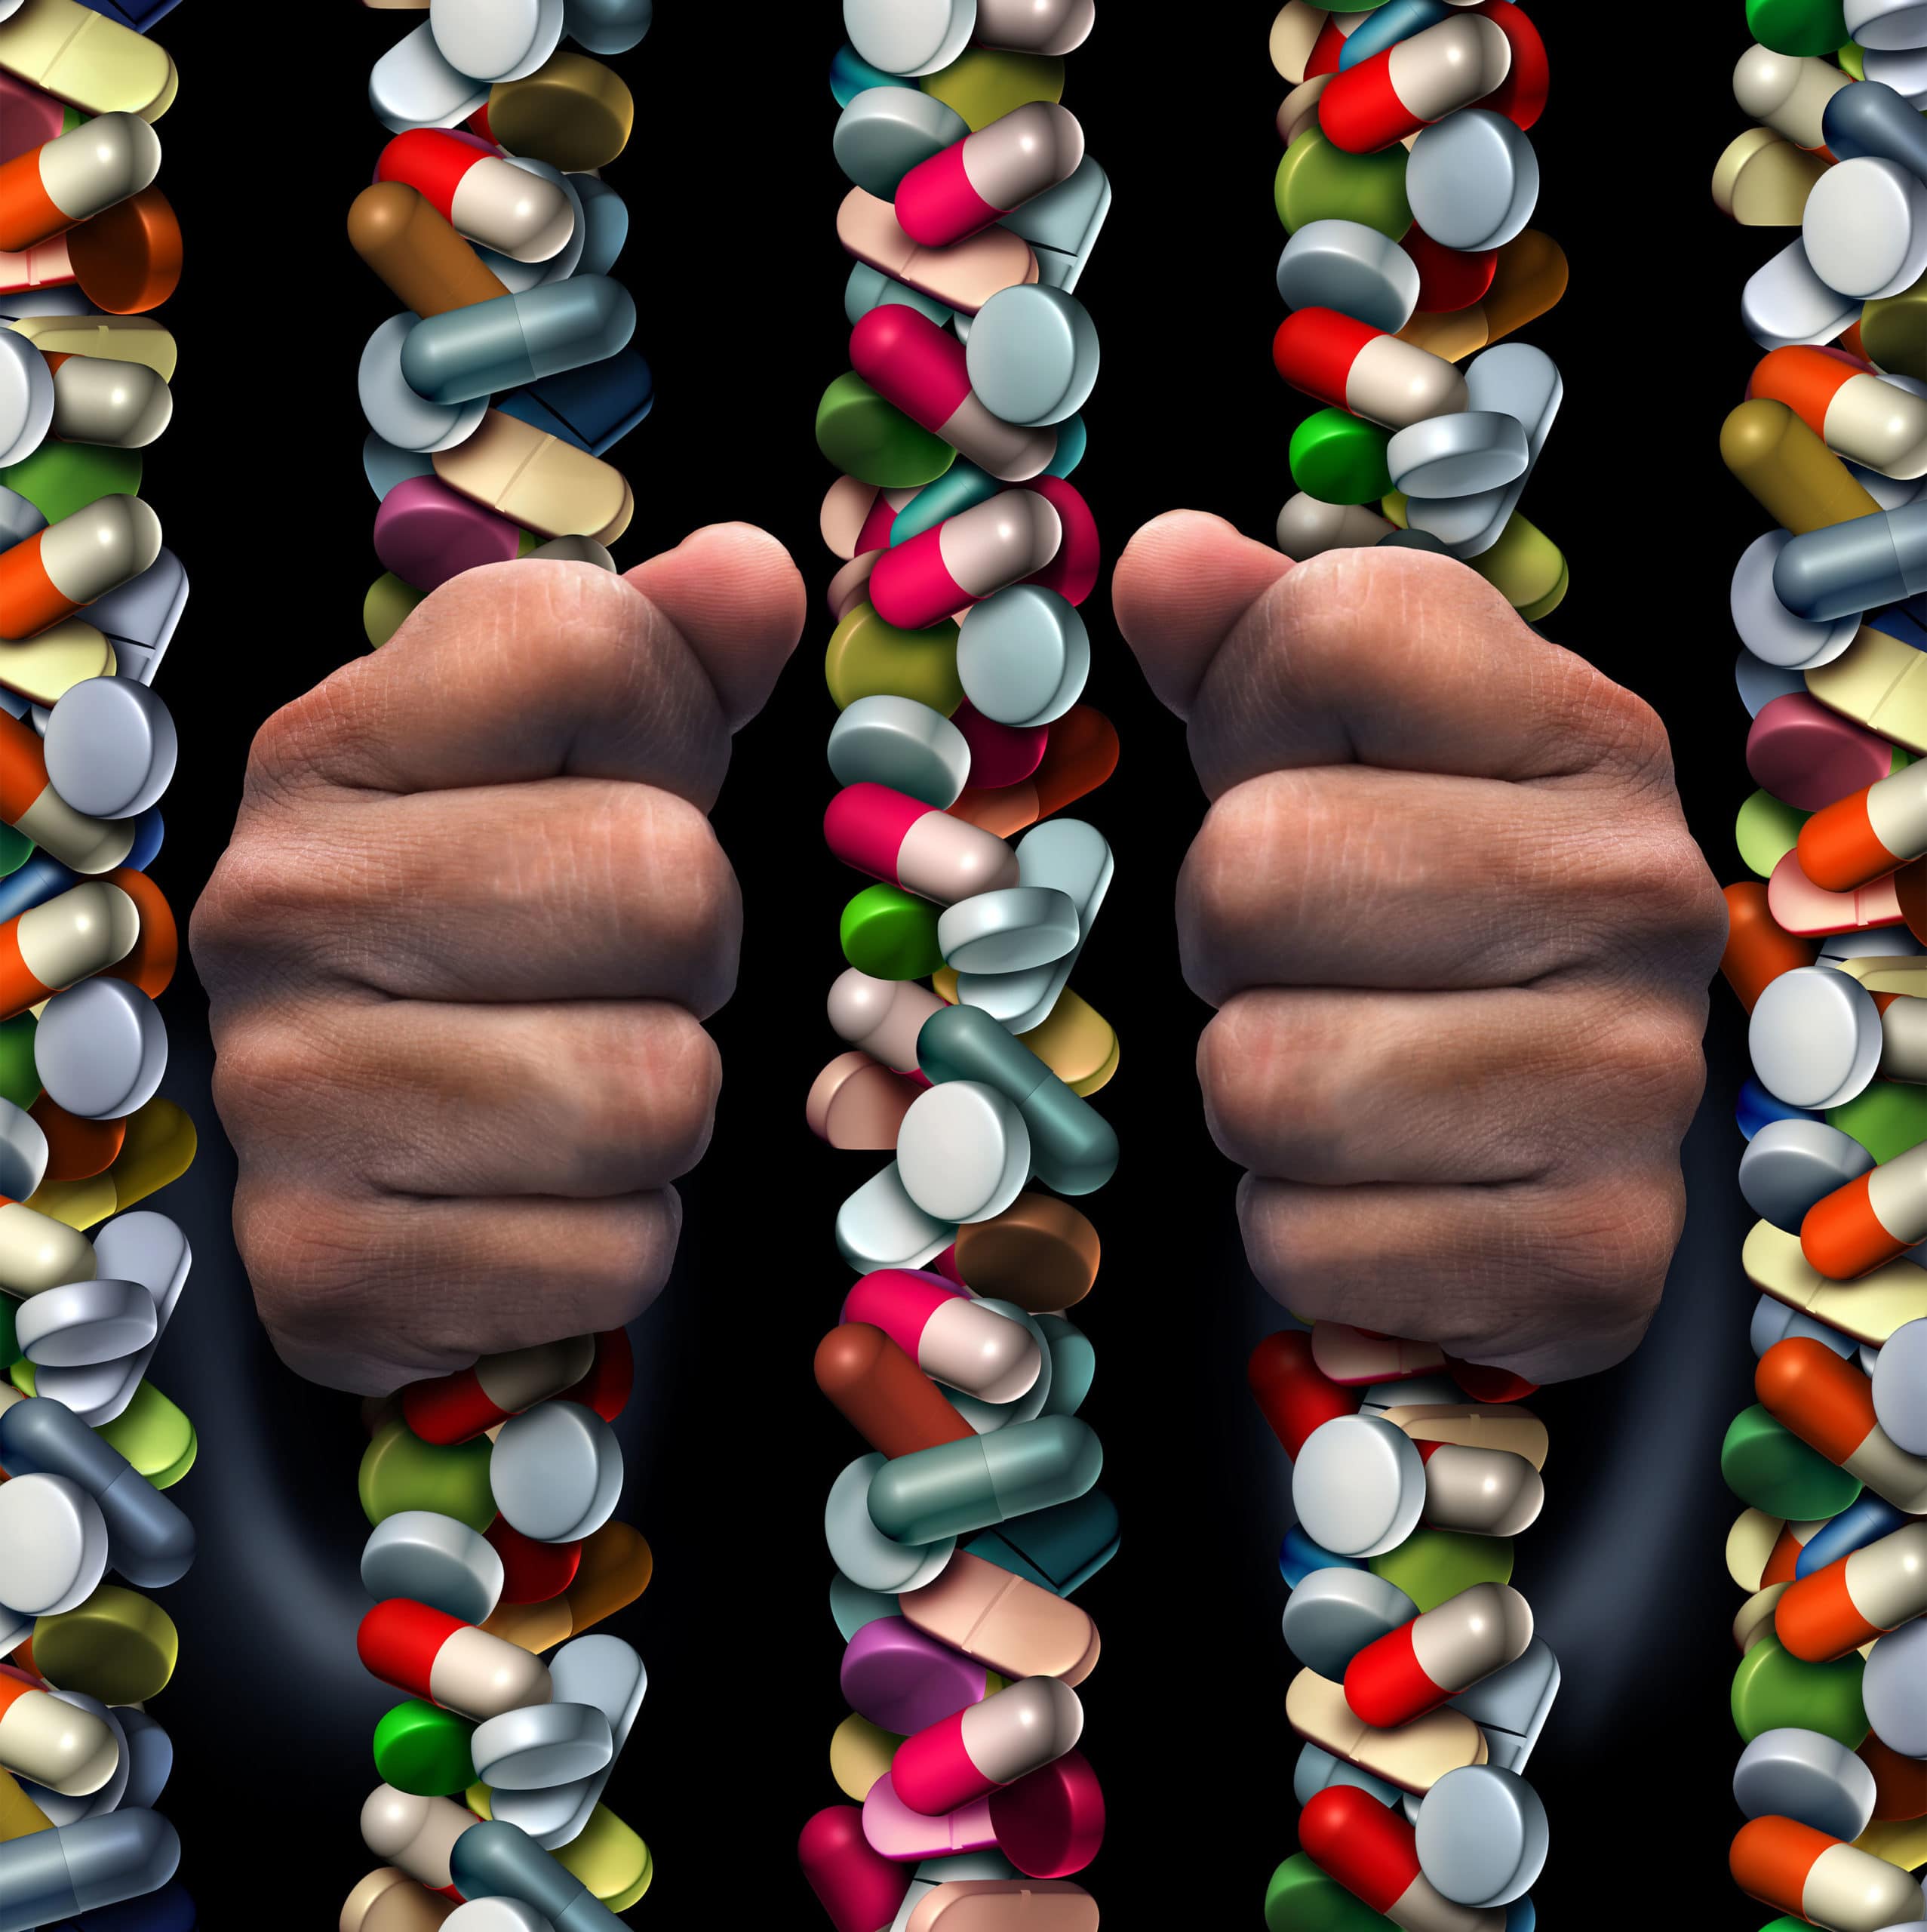 Pharmaceuticals Alone Are Not The Answer To Achieve Long-Term Recovery From Opioid Addiction